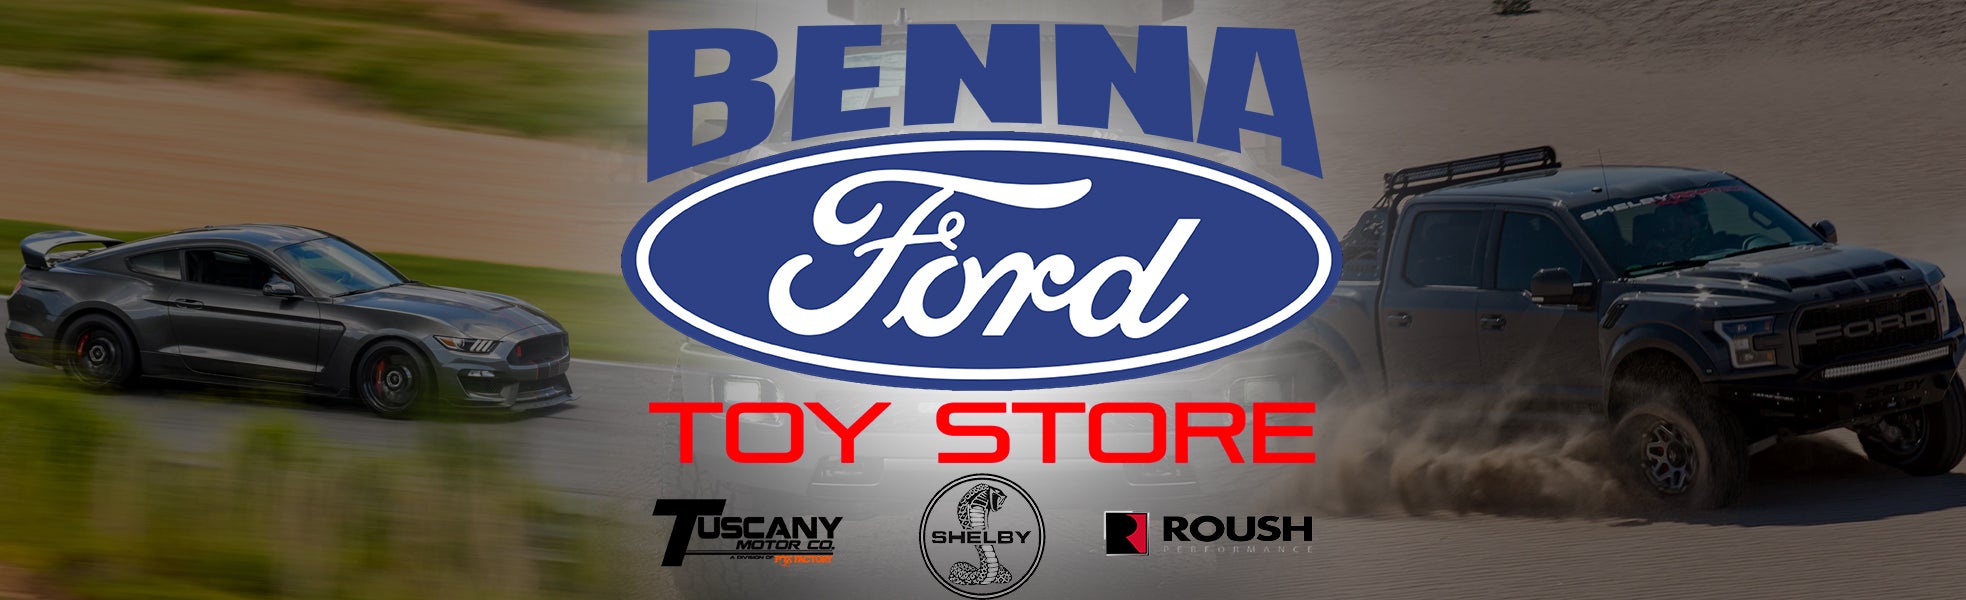 Benna Ford Toy Store Banner